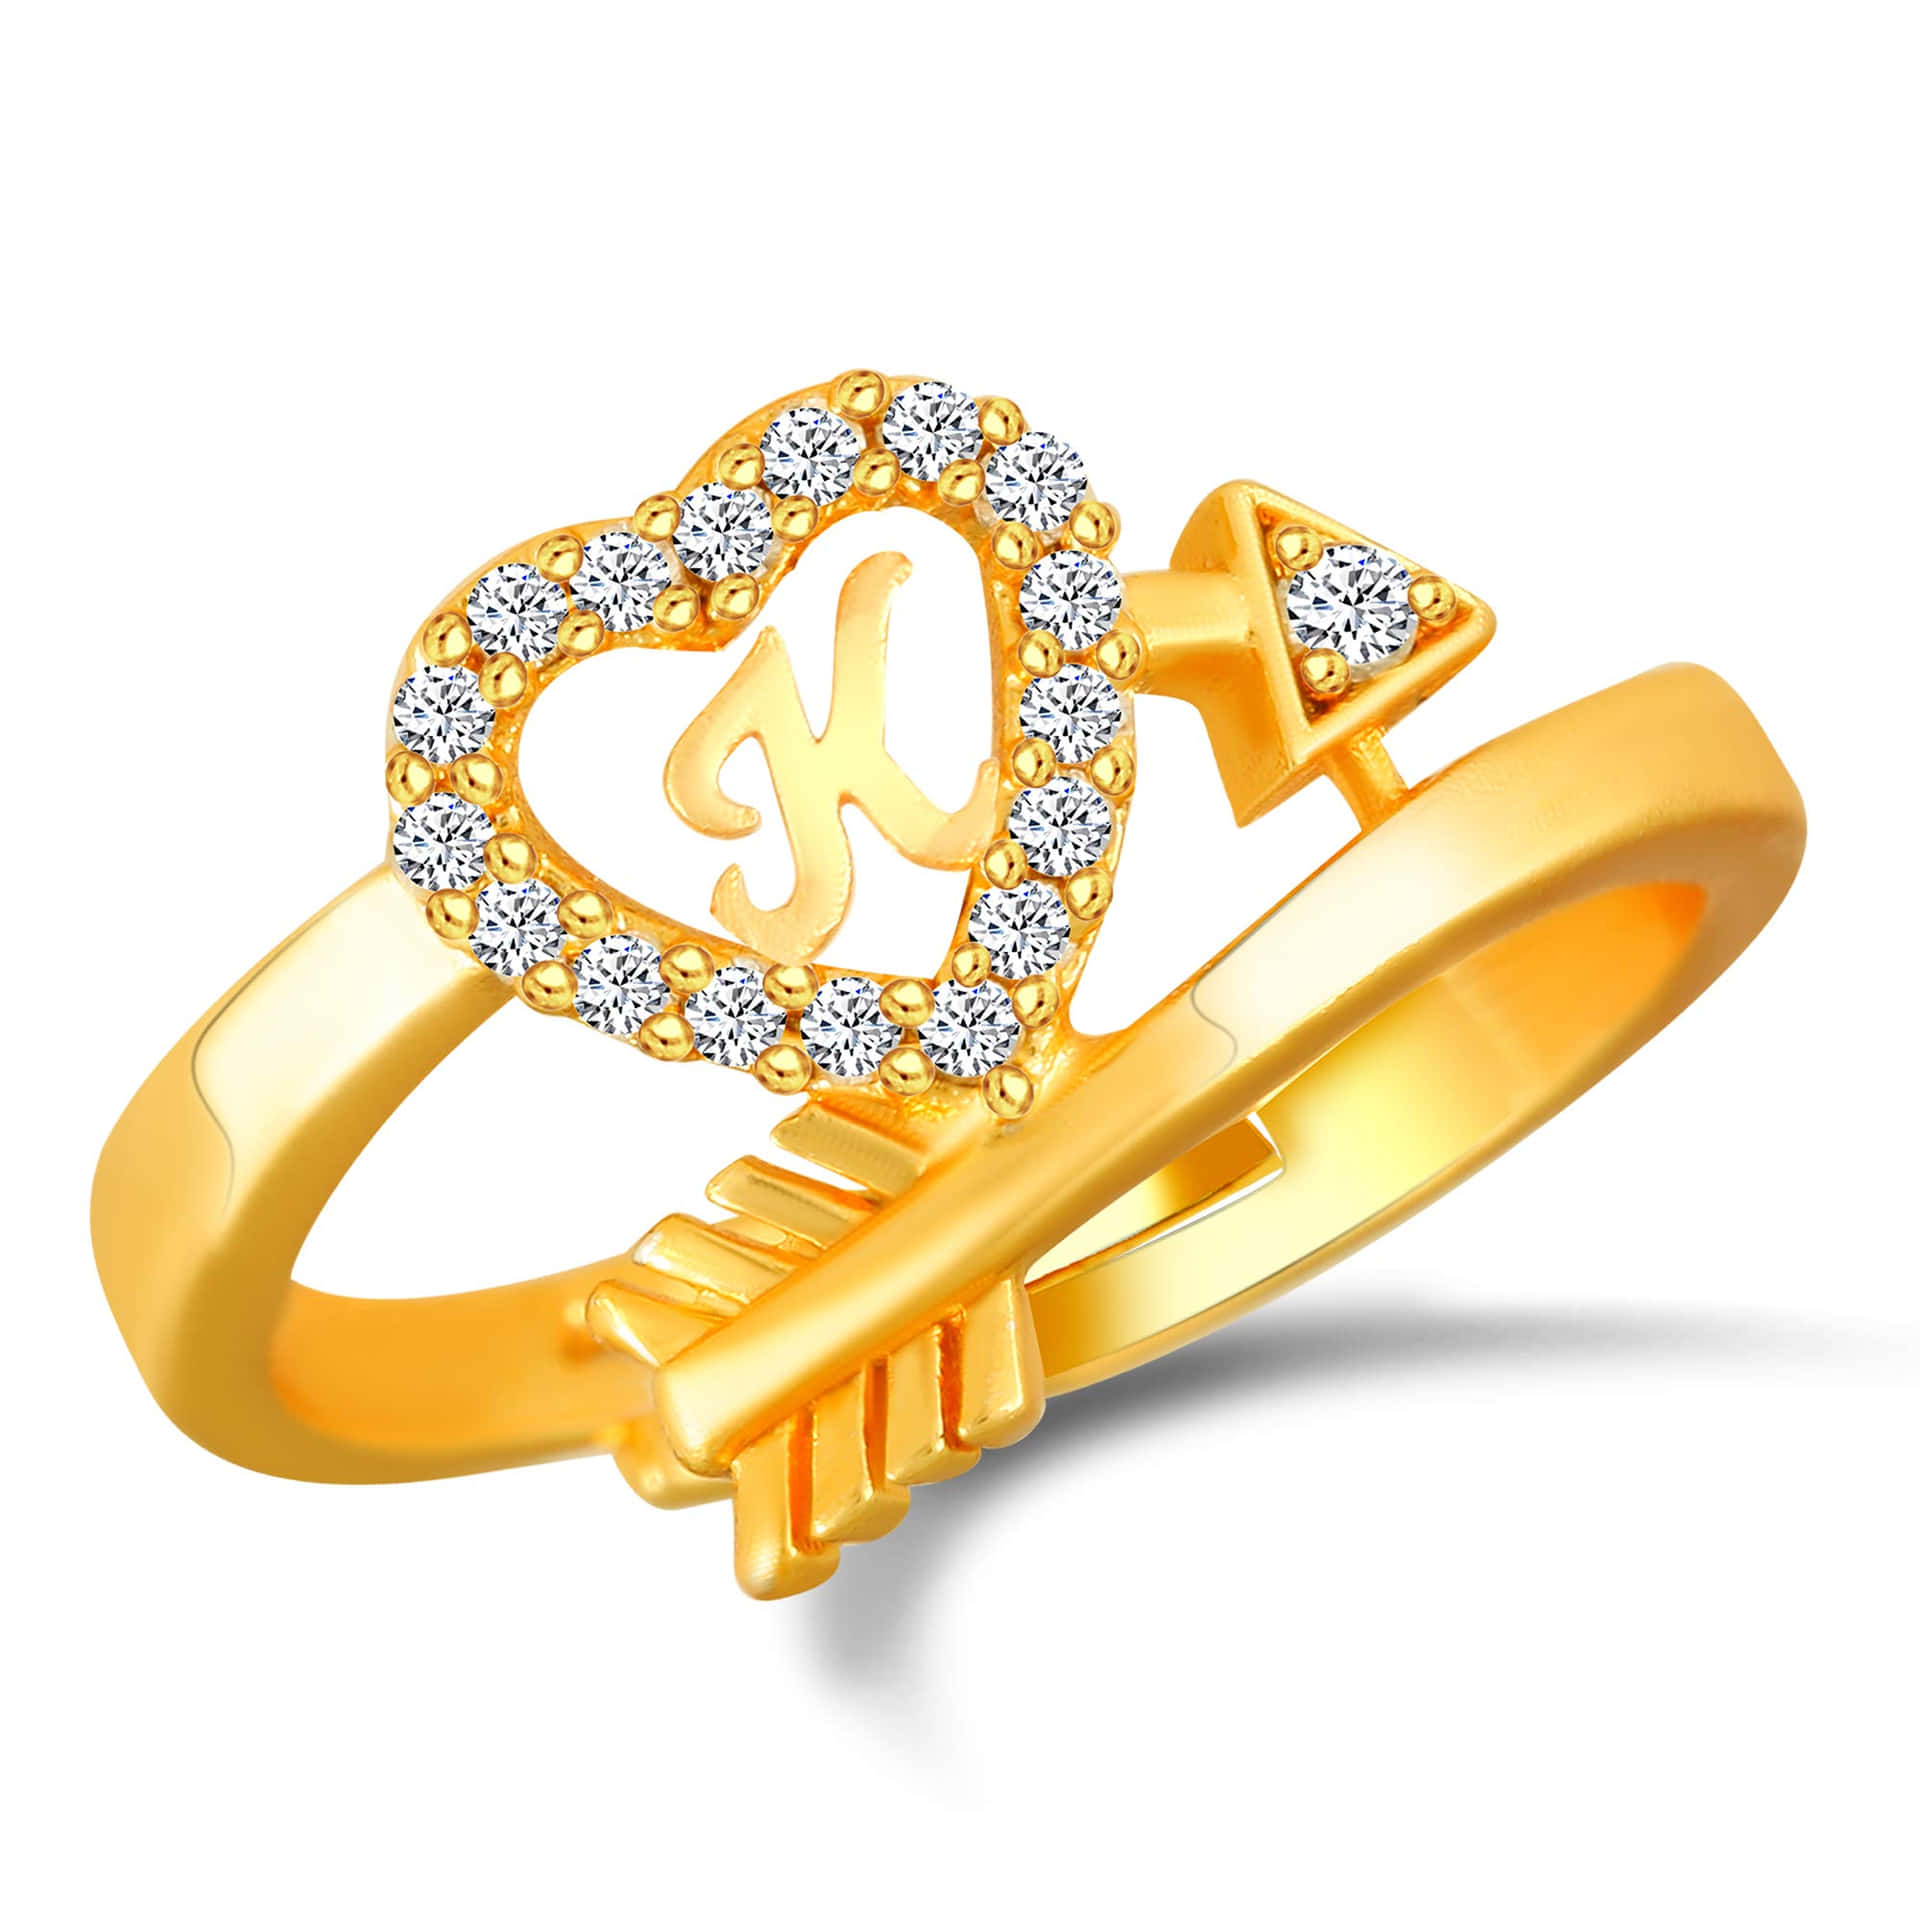 A Gold Ring With An Arrow And Heart